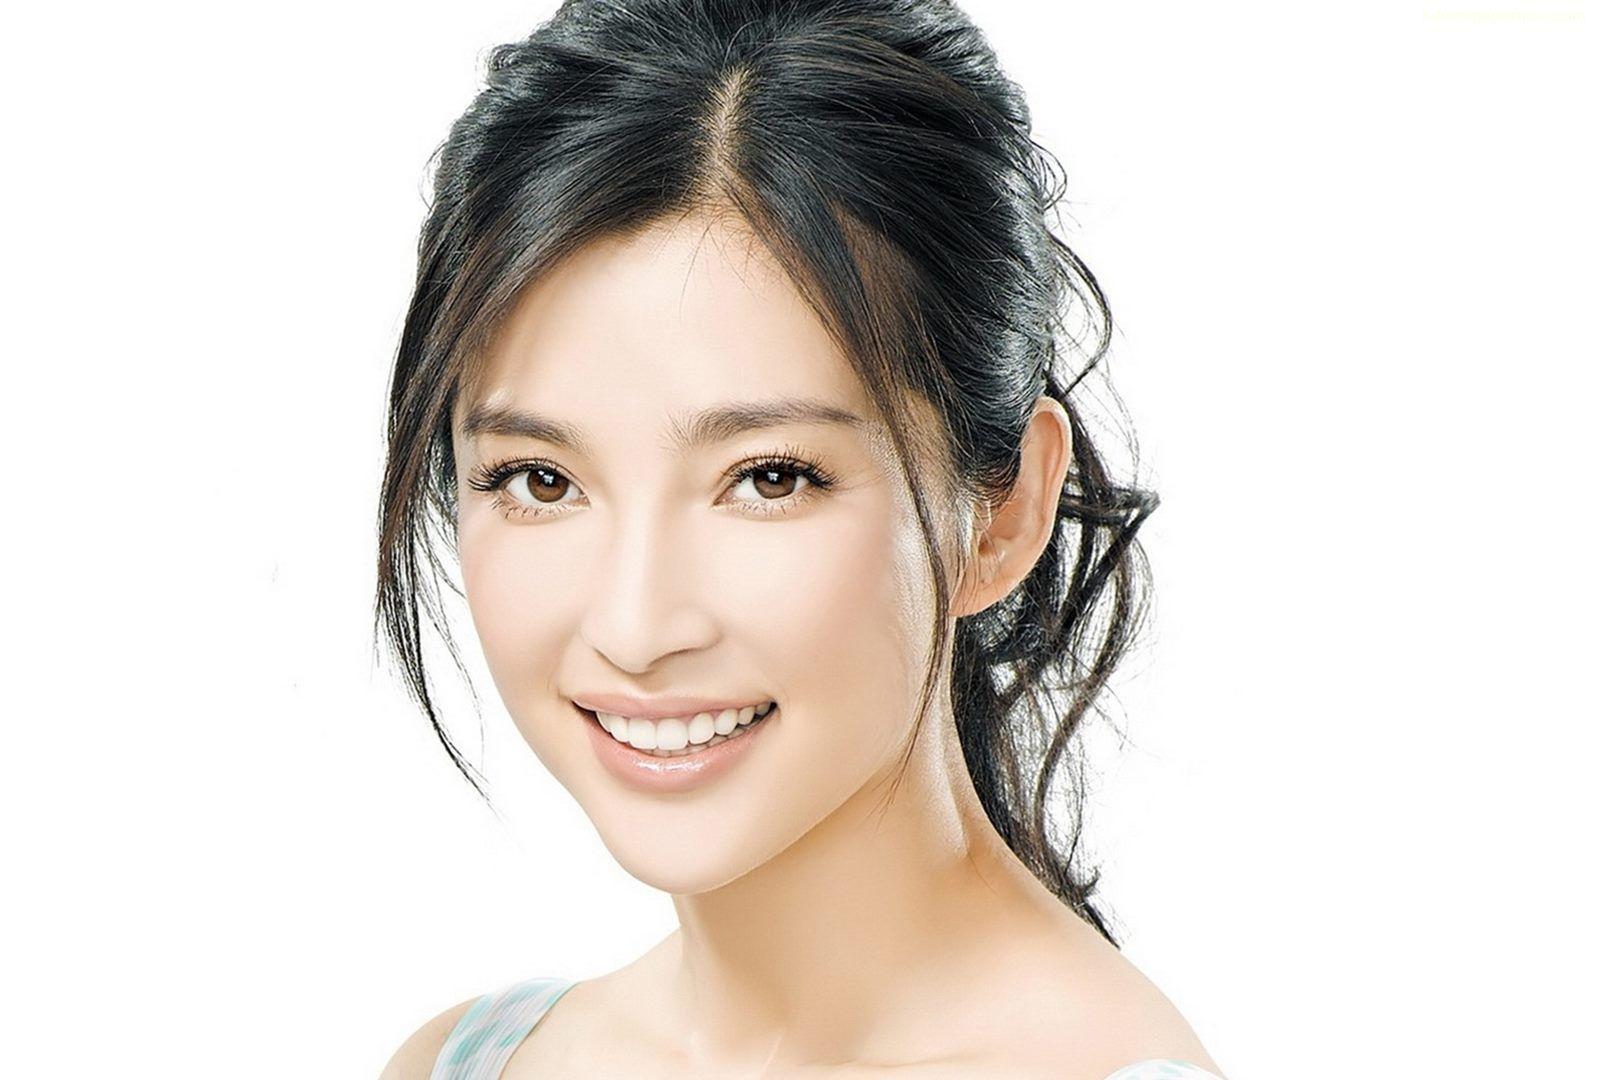 Chinese Actress Wallpapers Top Free Chinese Actress Backgrounds